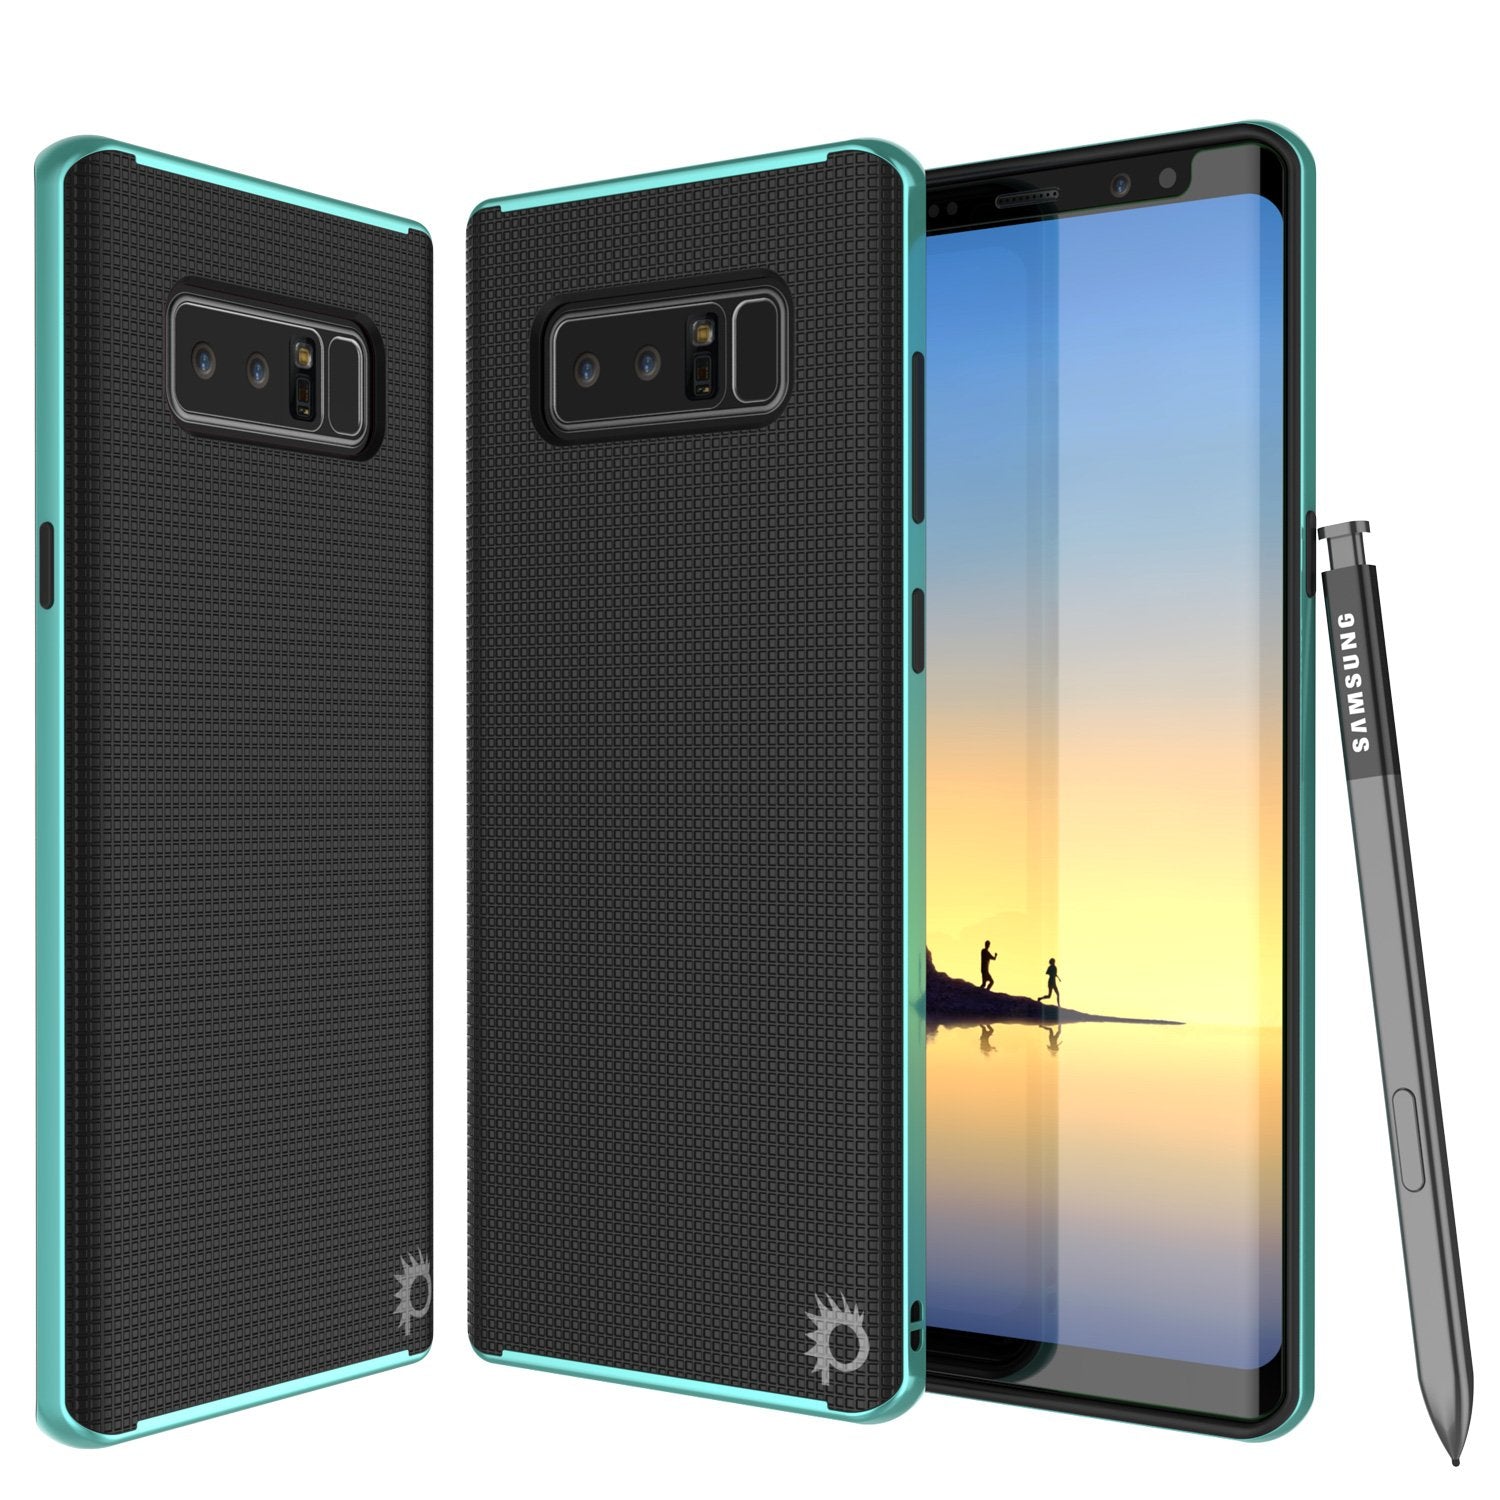 Galaxy Note 8 Screen/Shock Protective Dual Layer Case [Teal]